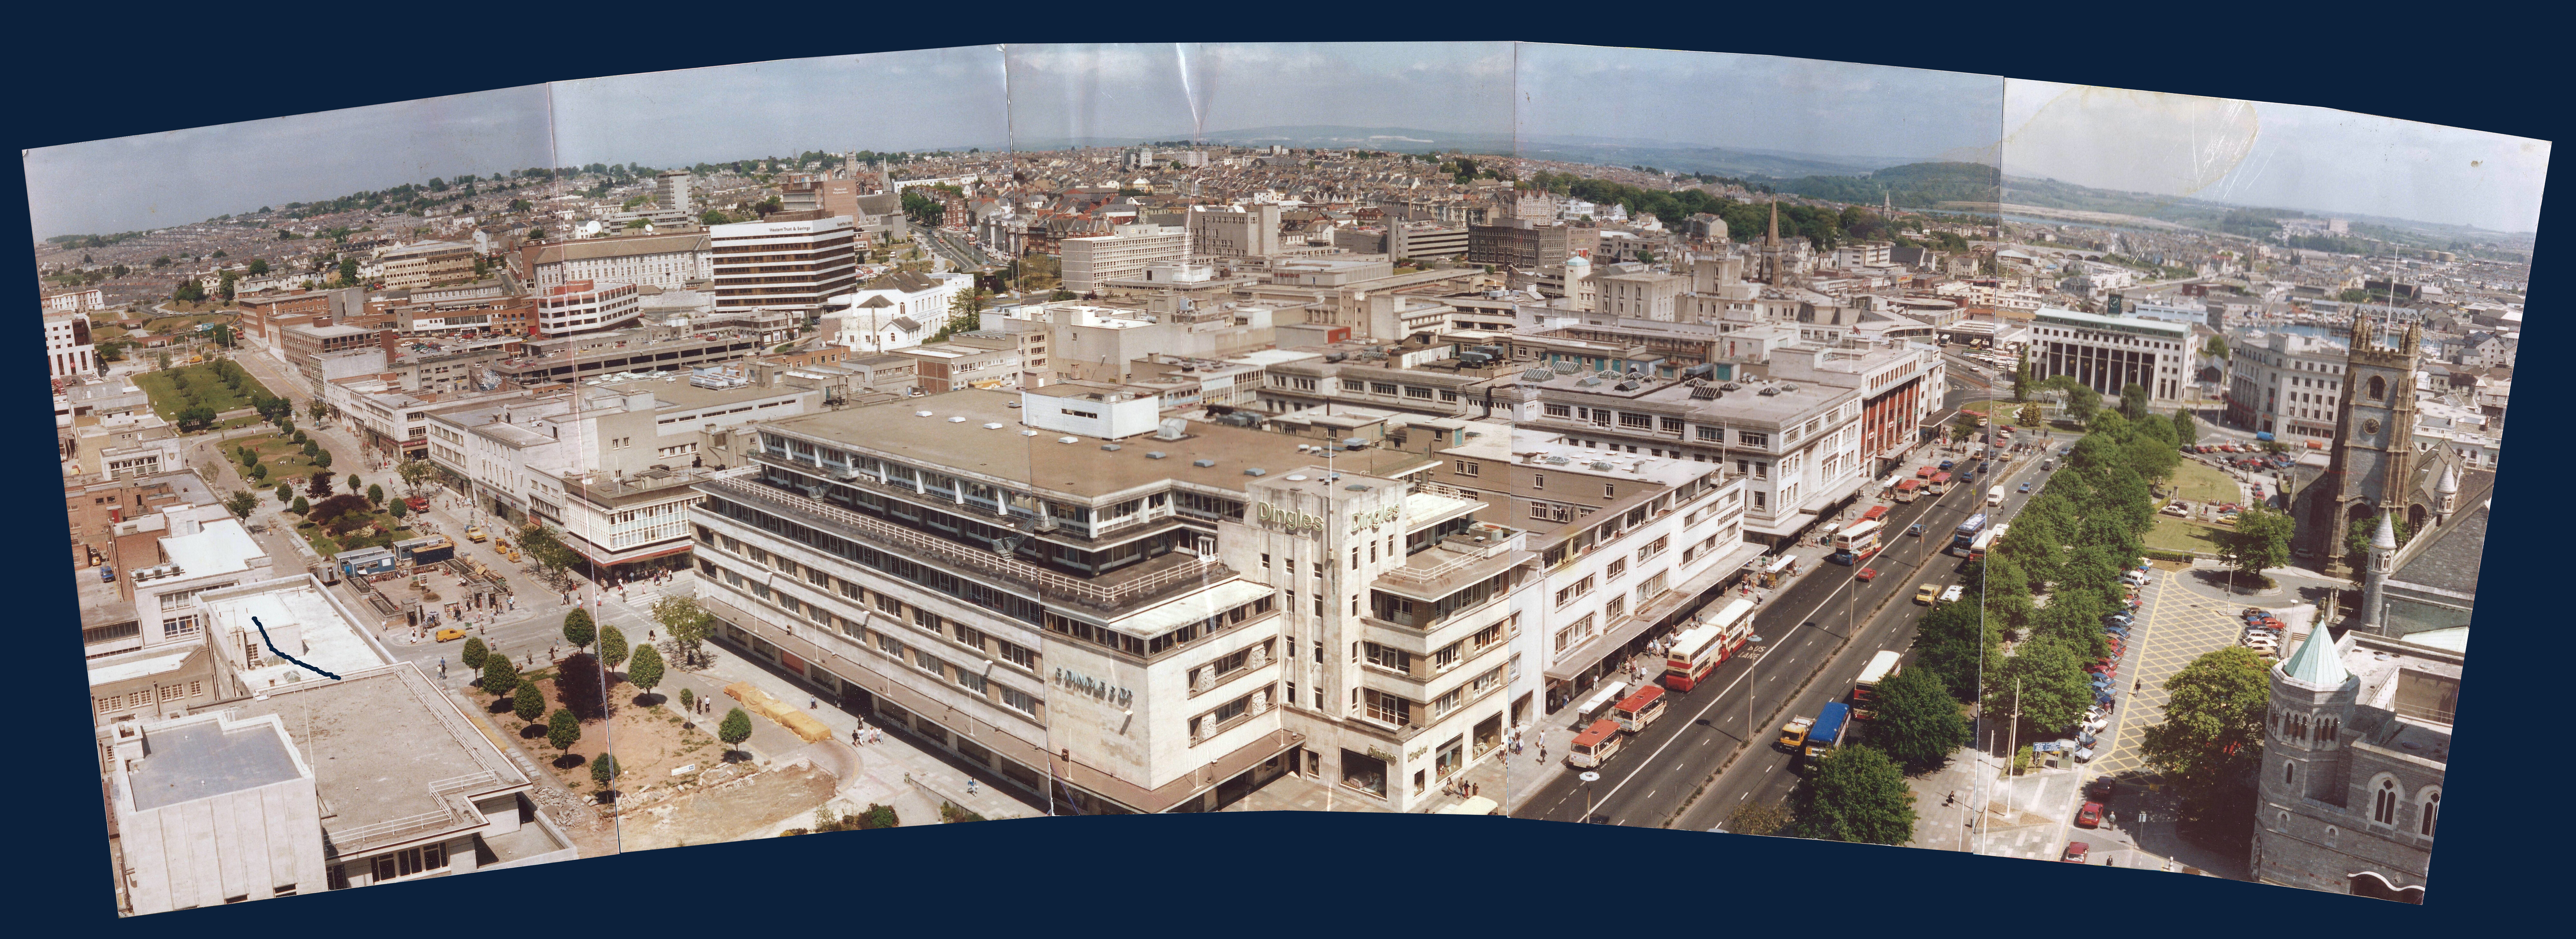 Plymouth City Centre panorama from Aerial Scenes of Plymouth, Devon - 28th June 1987